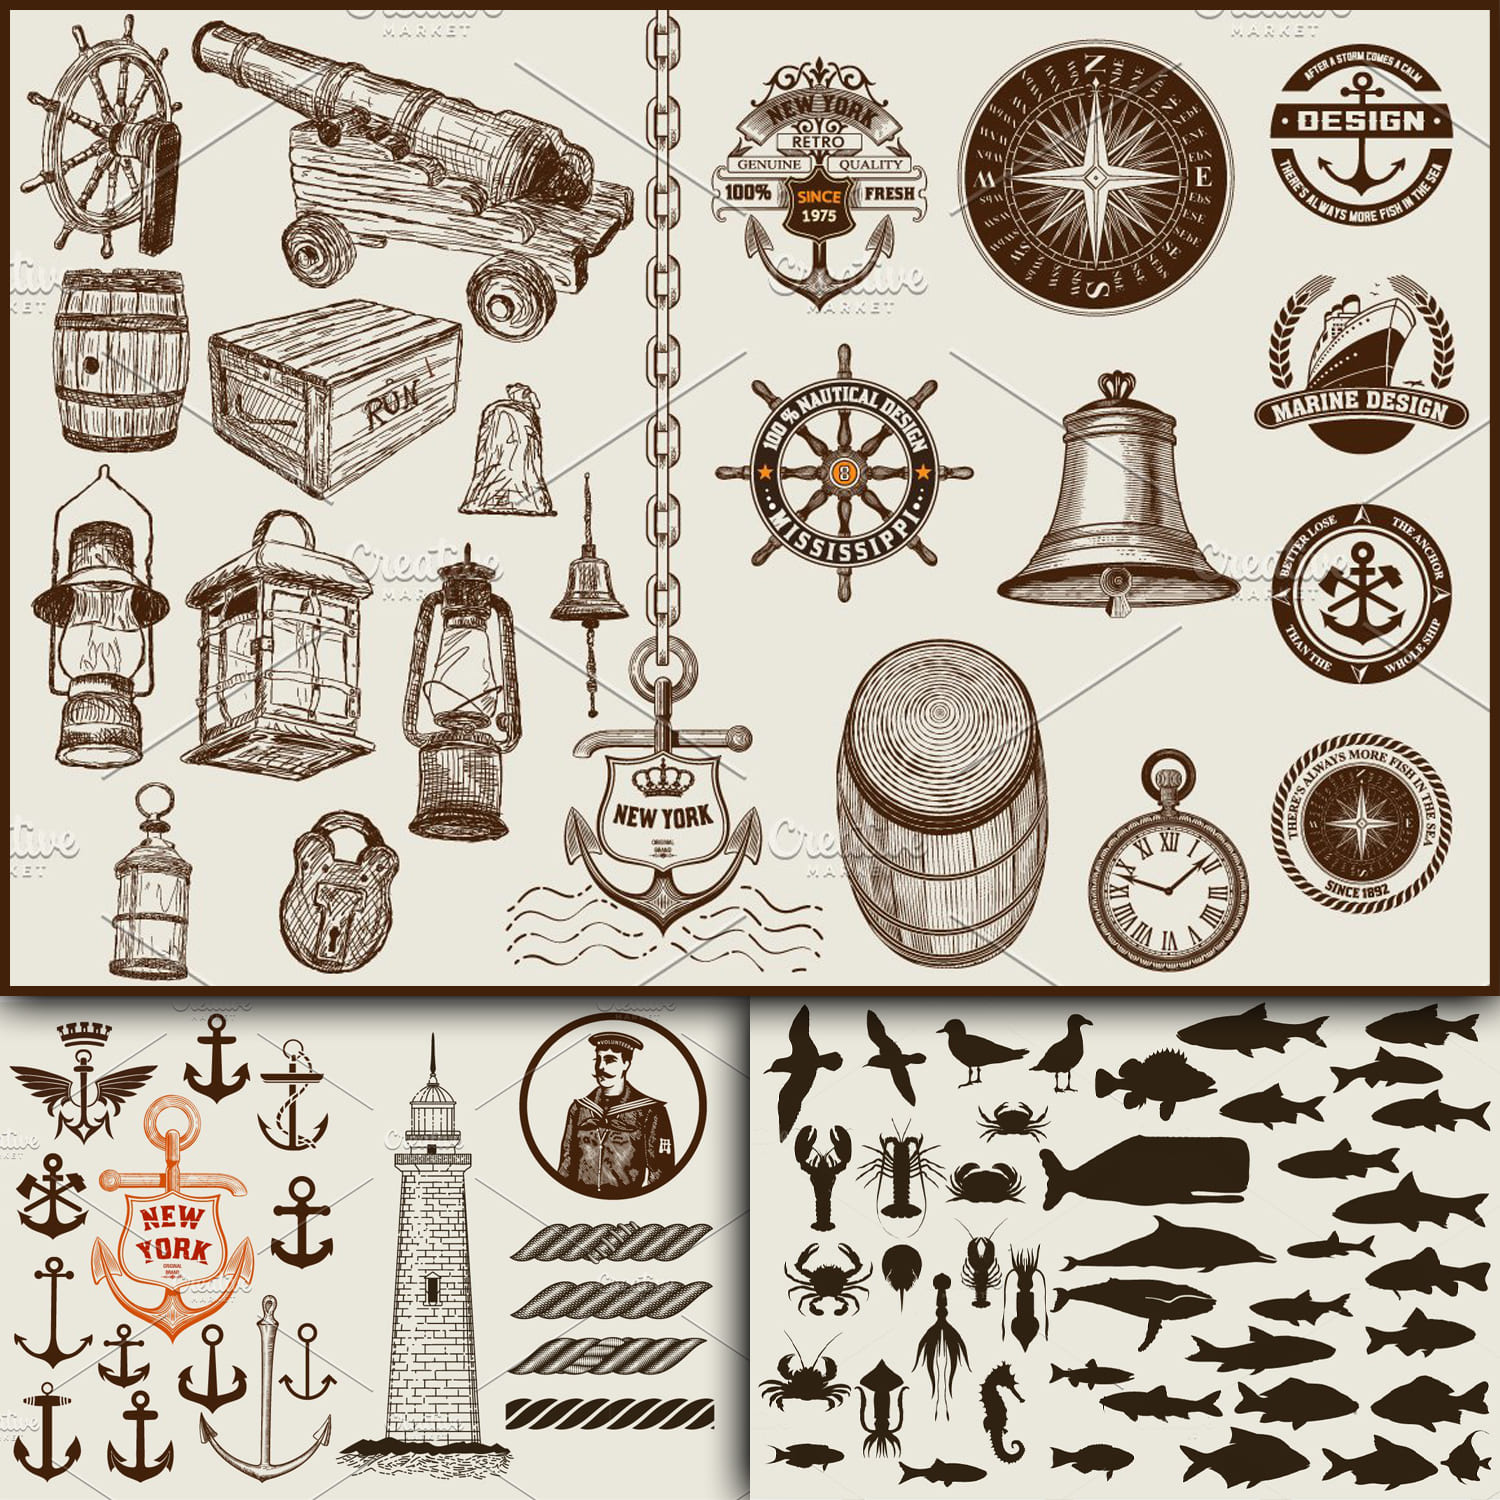 Elements of sea life: sea animals, lighthouses, anchors, lamps.